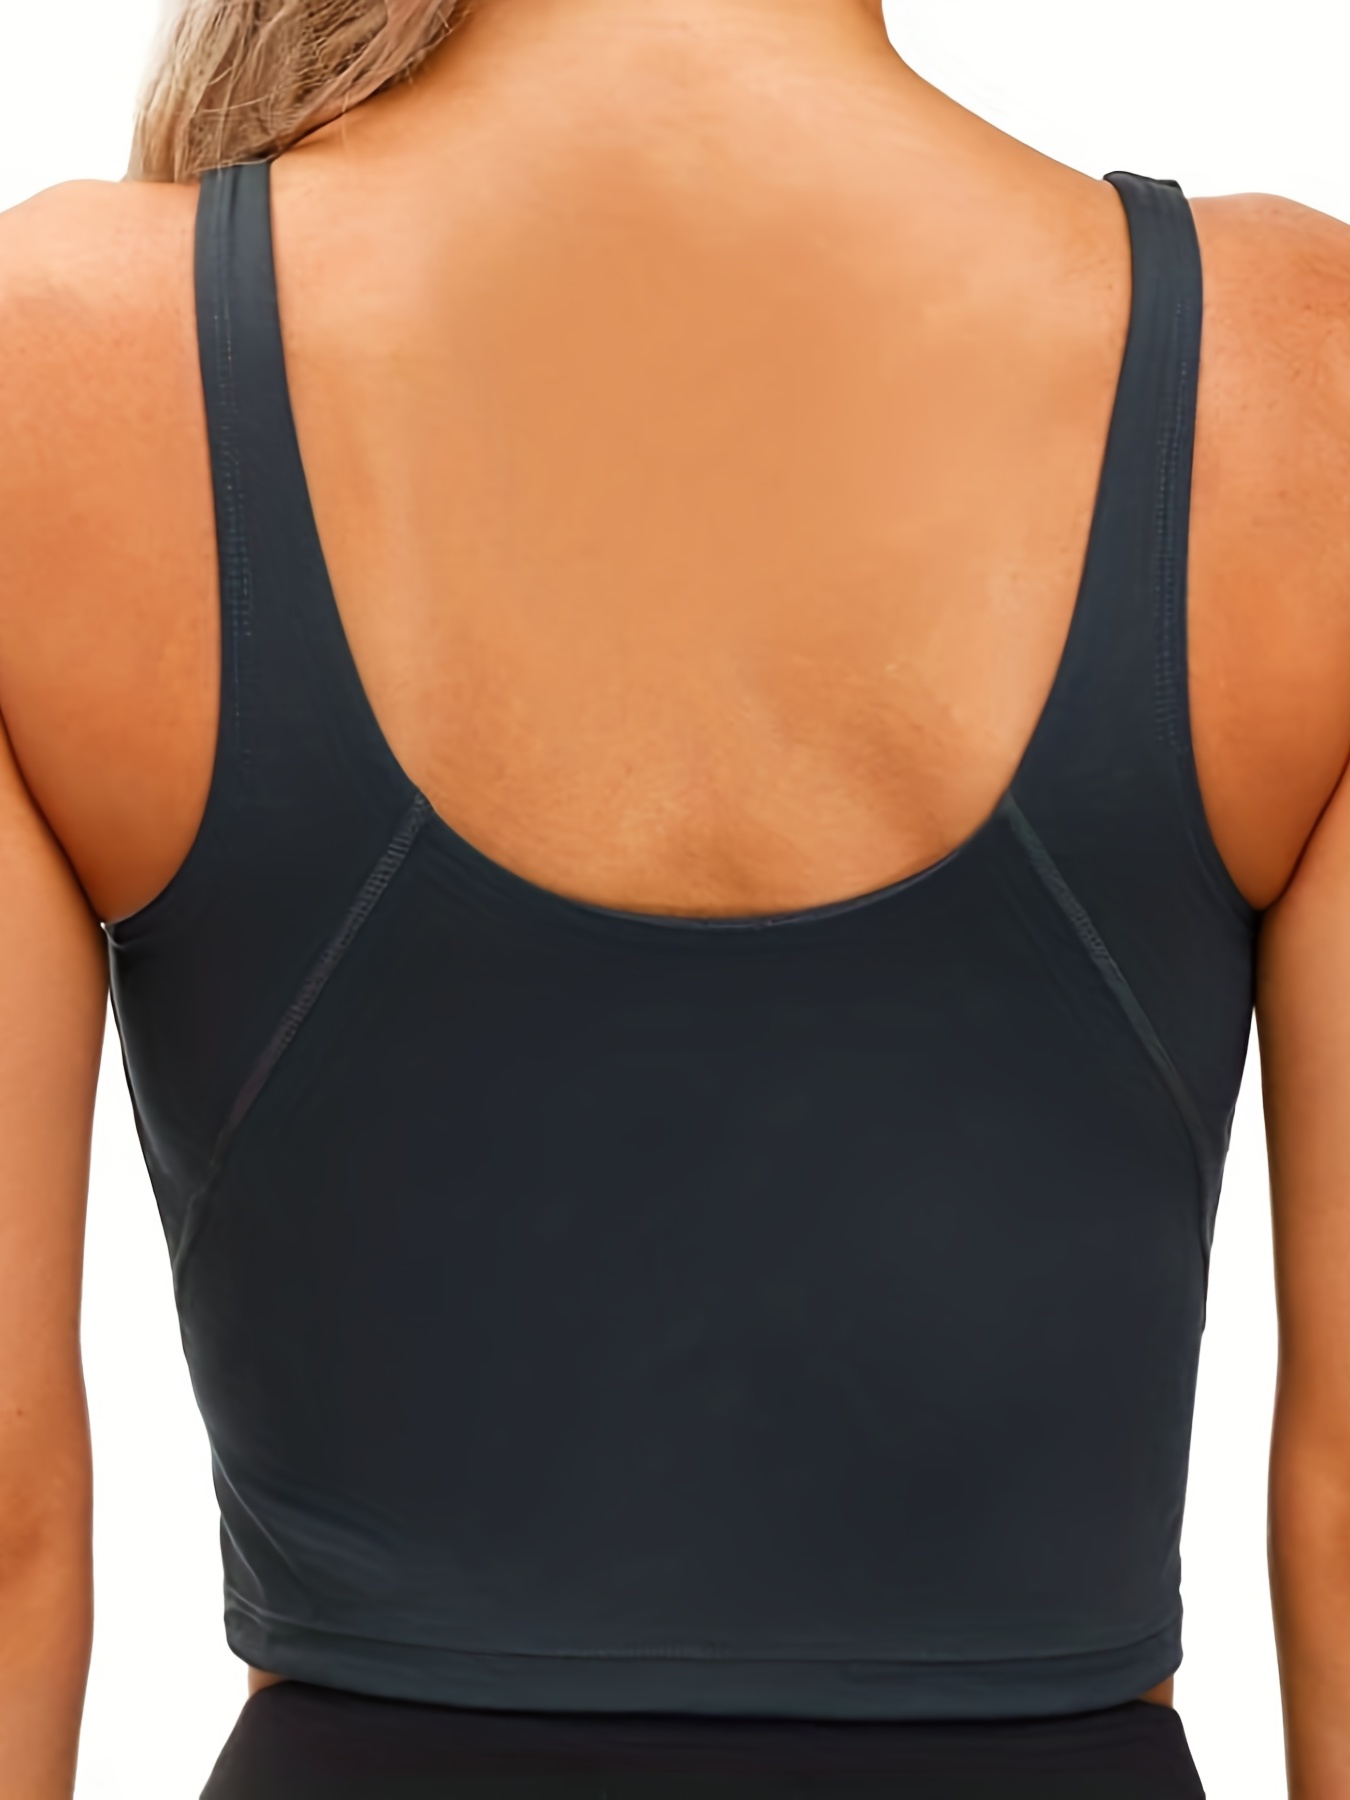 The Gym People, Tops, Charcoal Grey Womens Sports Bra Longline